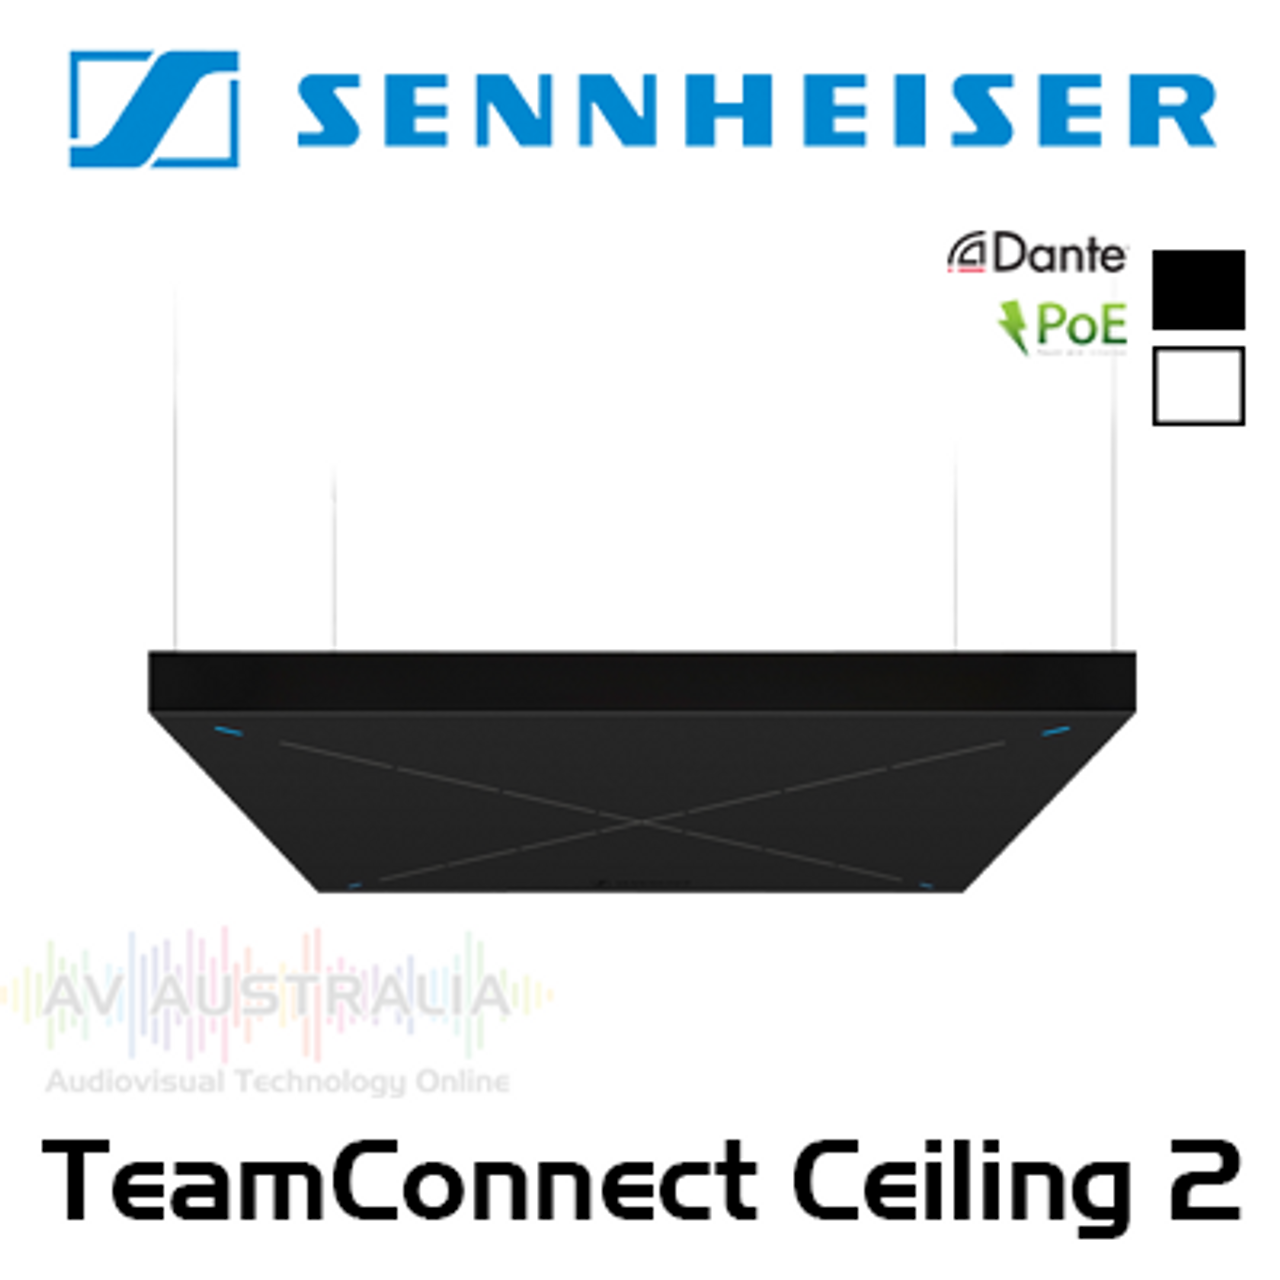 Sennheiser TeamConnect Ceiling 2 Ceiling Microphone With TrueVoicelift